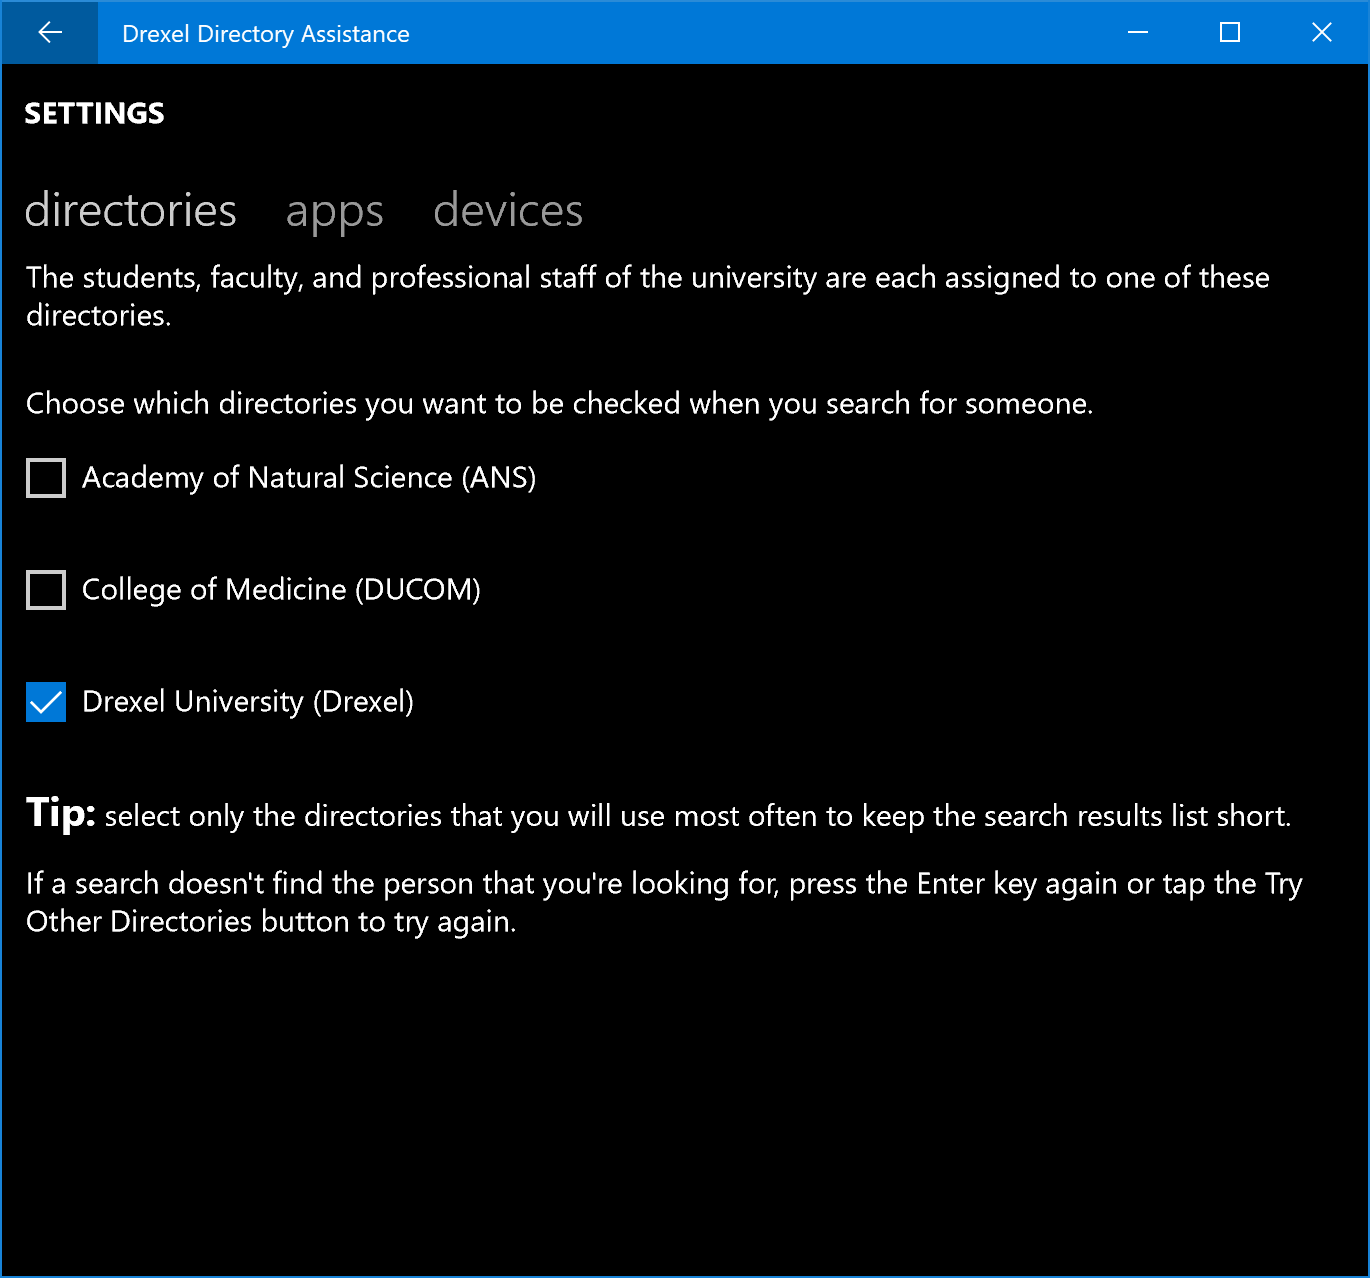 When multiple devices are linked to a Microsoft account, the app works across devices. These settings control which "remote" devices the current device will look to provide phone, Skype, or Skype for Business calling services.